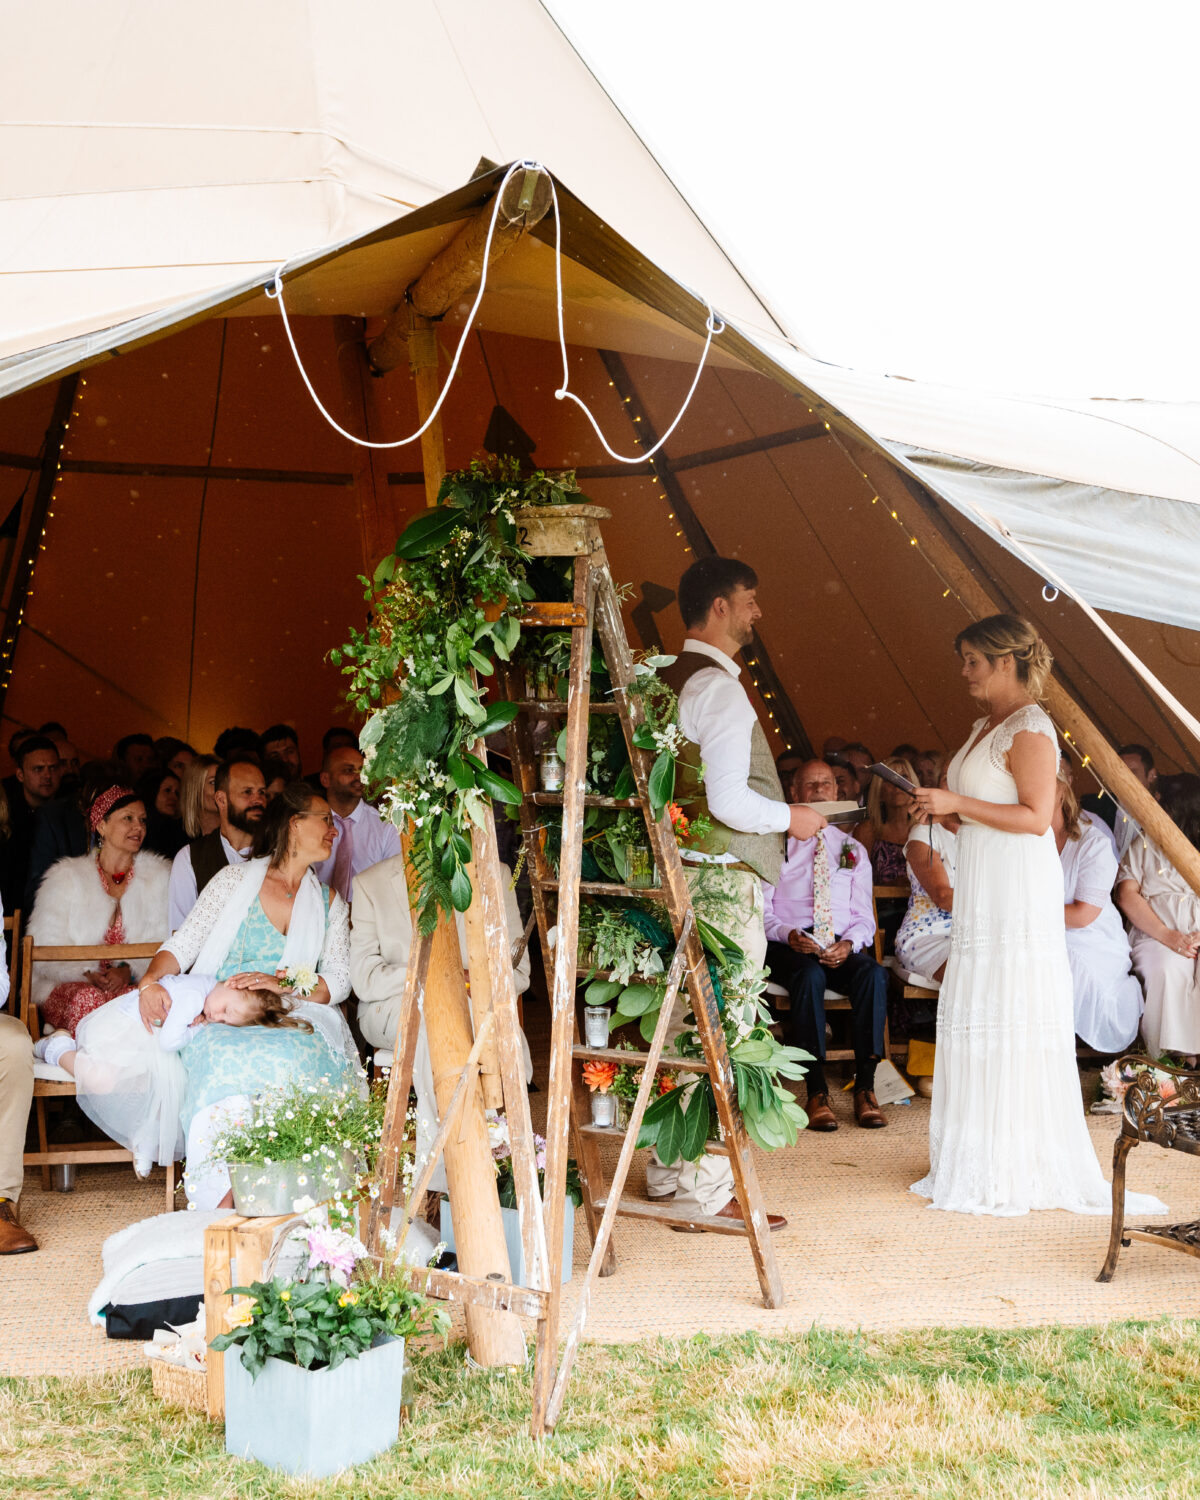 Celebrant ceremony in a tipi (credit: jmsweeneyphotography.co.uk)